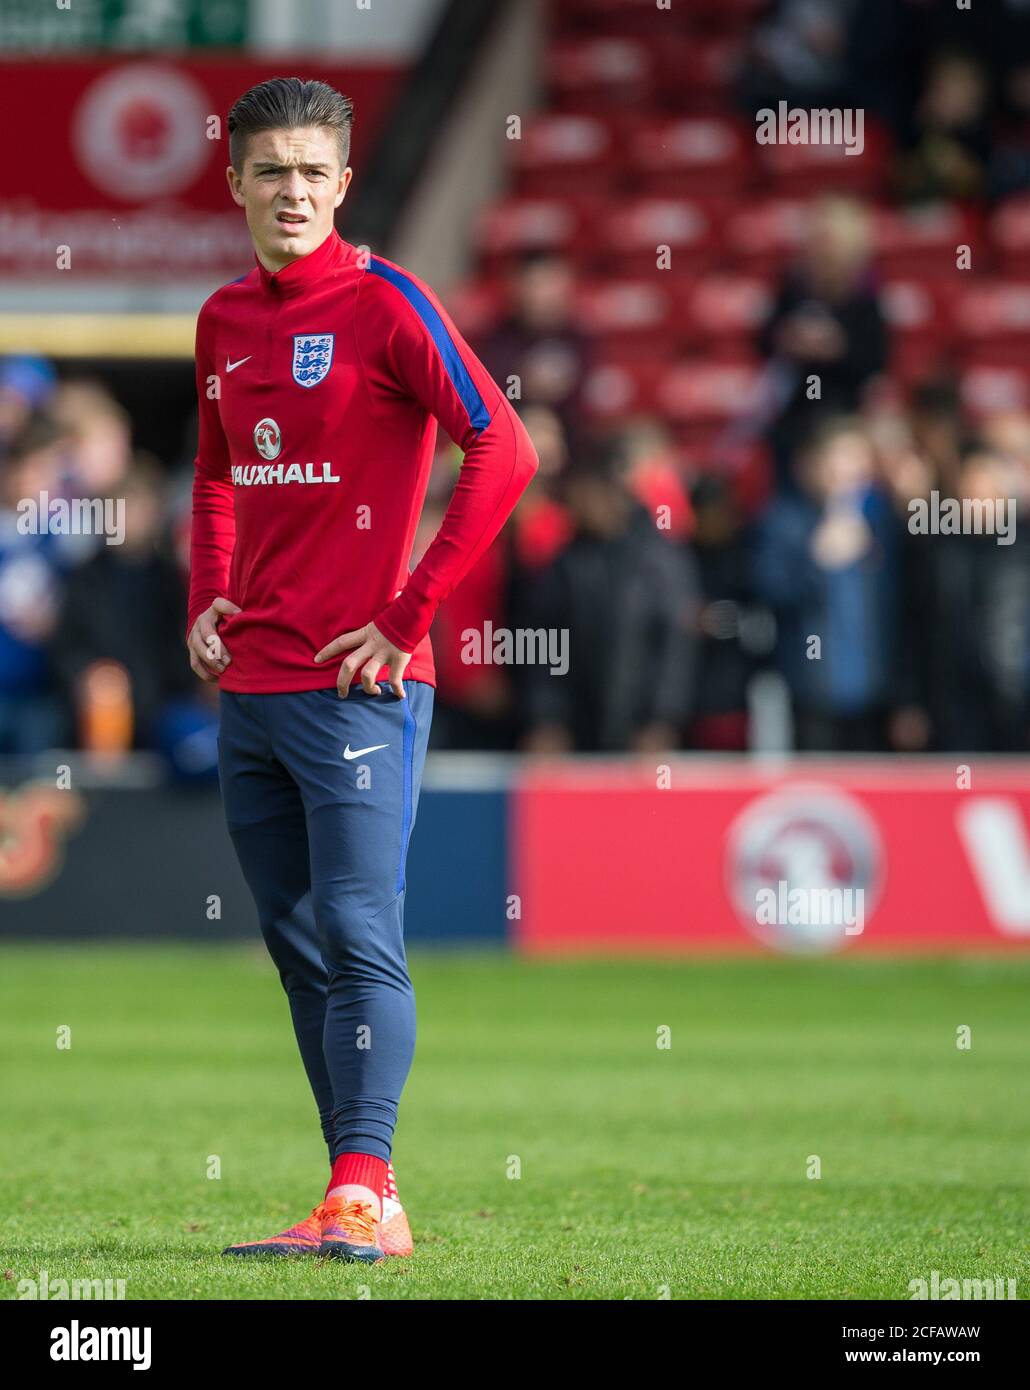 Walsall, UK. 11th Oct, 2016. Jack Grealish (Aston Villa) of England U21 before the International European Under-21 Championship Qualifying match match between England and Bosnia and Herzegovina at the Banks's Stadium, Walsall, England on 11 October 2016. Photo by Andy Rowland. Credit: PRiME Media Images/Alamy Live News Stock Photo